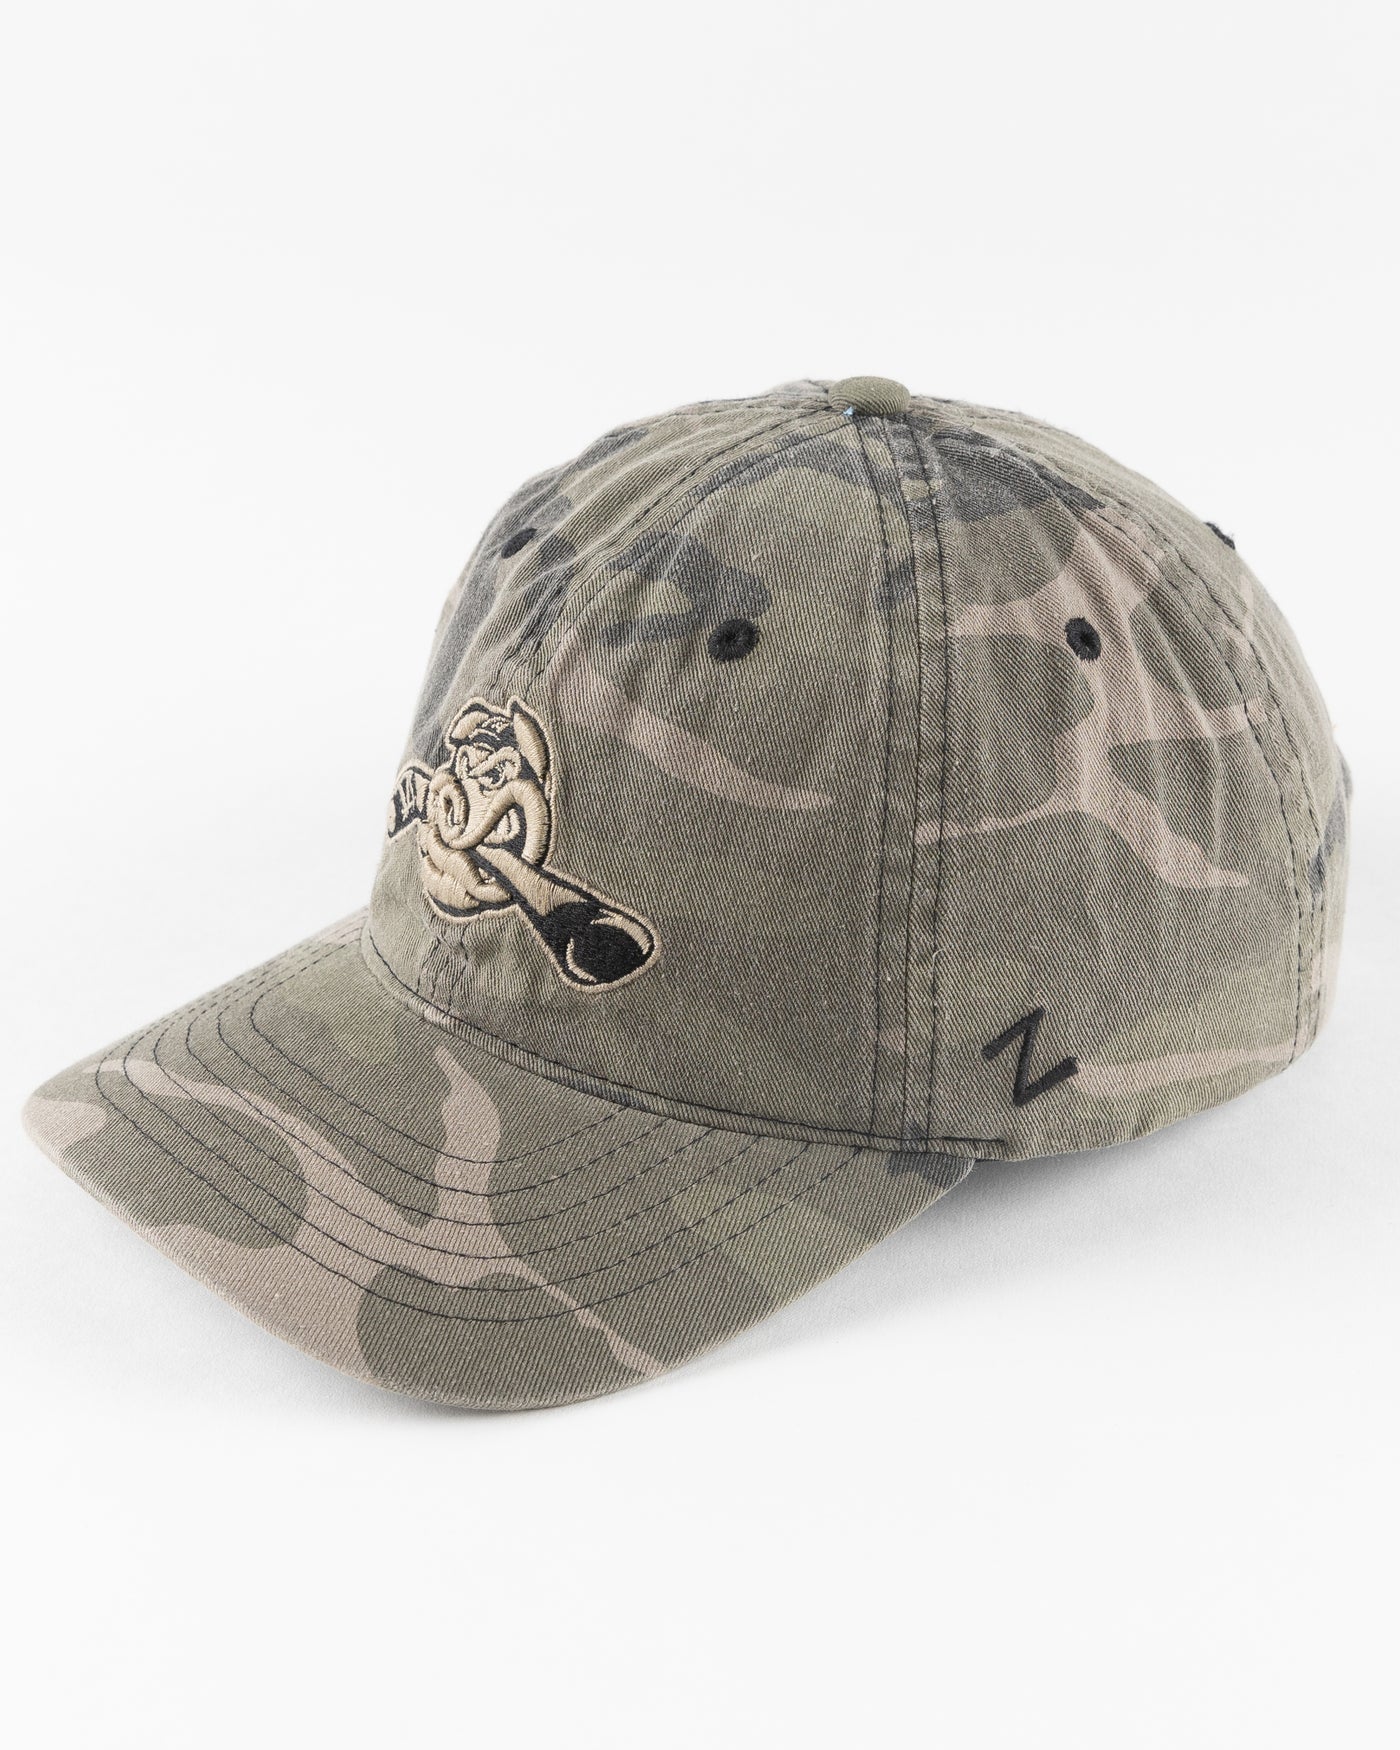 camo Zephyr adjustable cap with Hammy embroidered on front - left angle lay flat